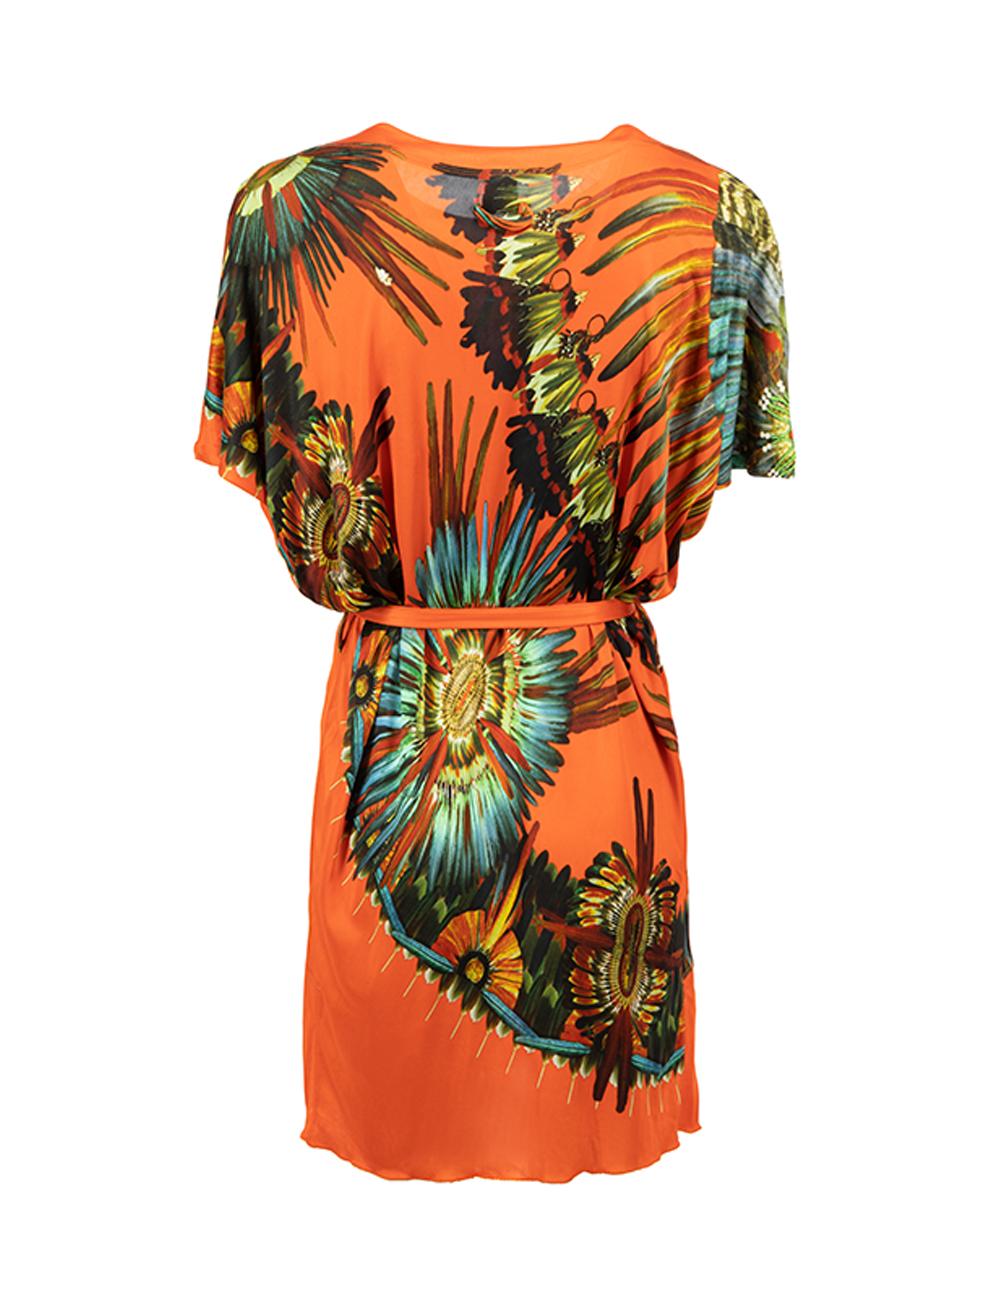 Jean Paul Gaultier Soleil Floral Printed Belted Top Size XS In Good Condition For Sale In London, GB